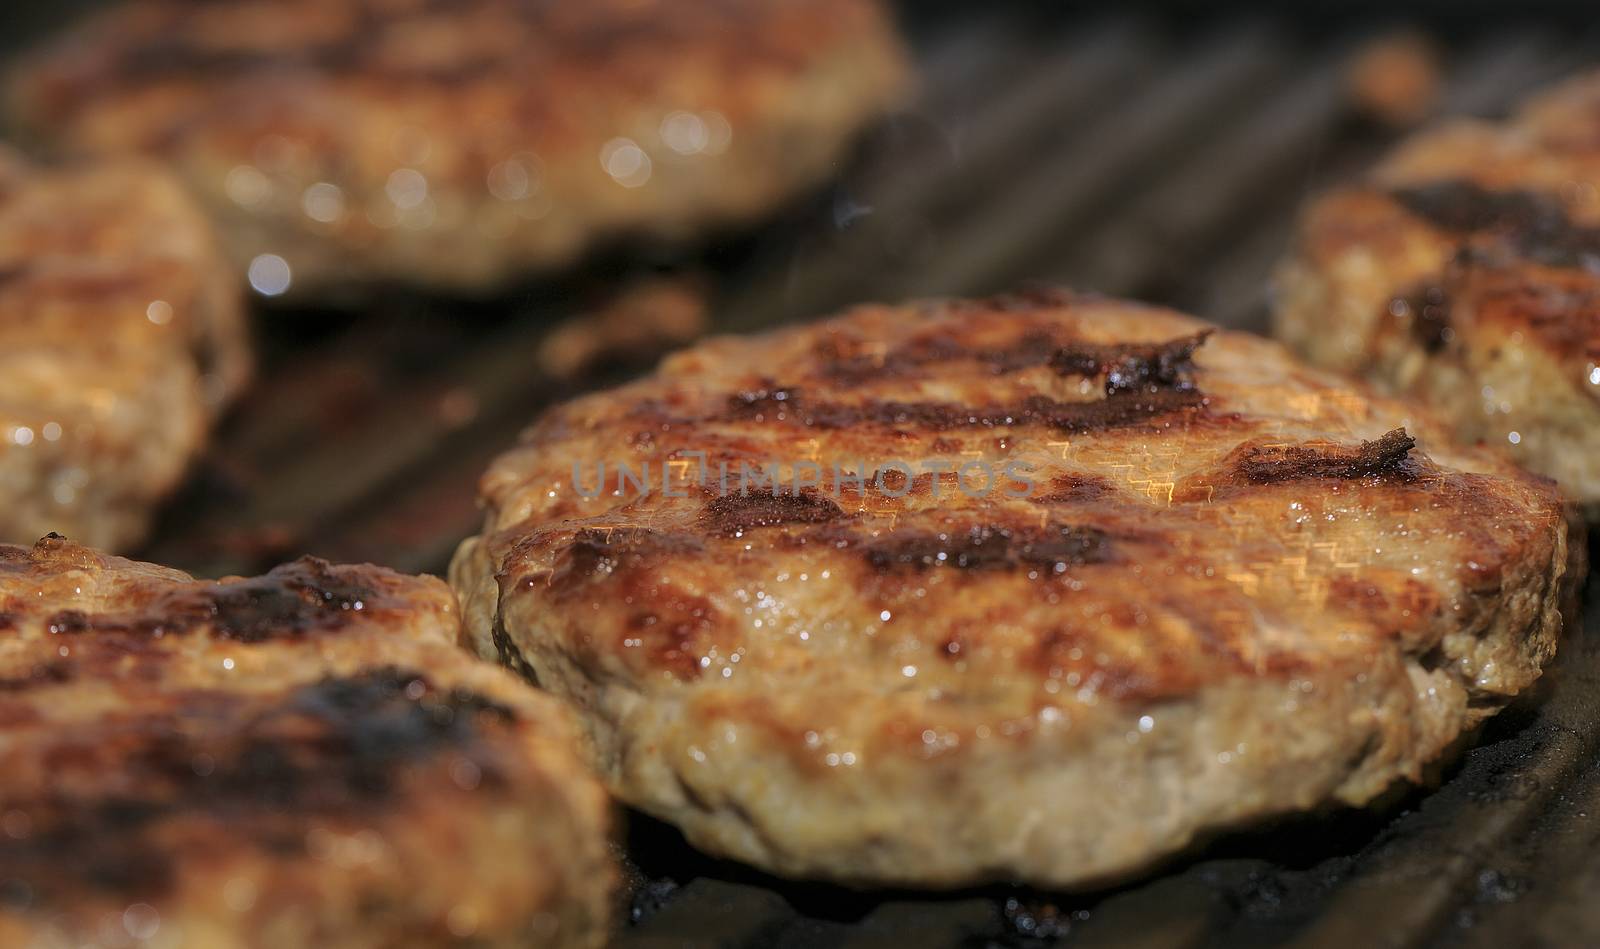 Delicious hamburgers on the grill by nachrc2001